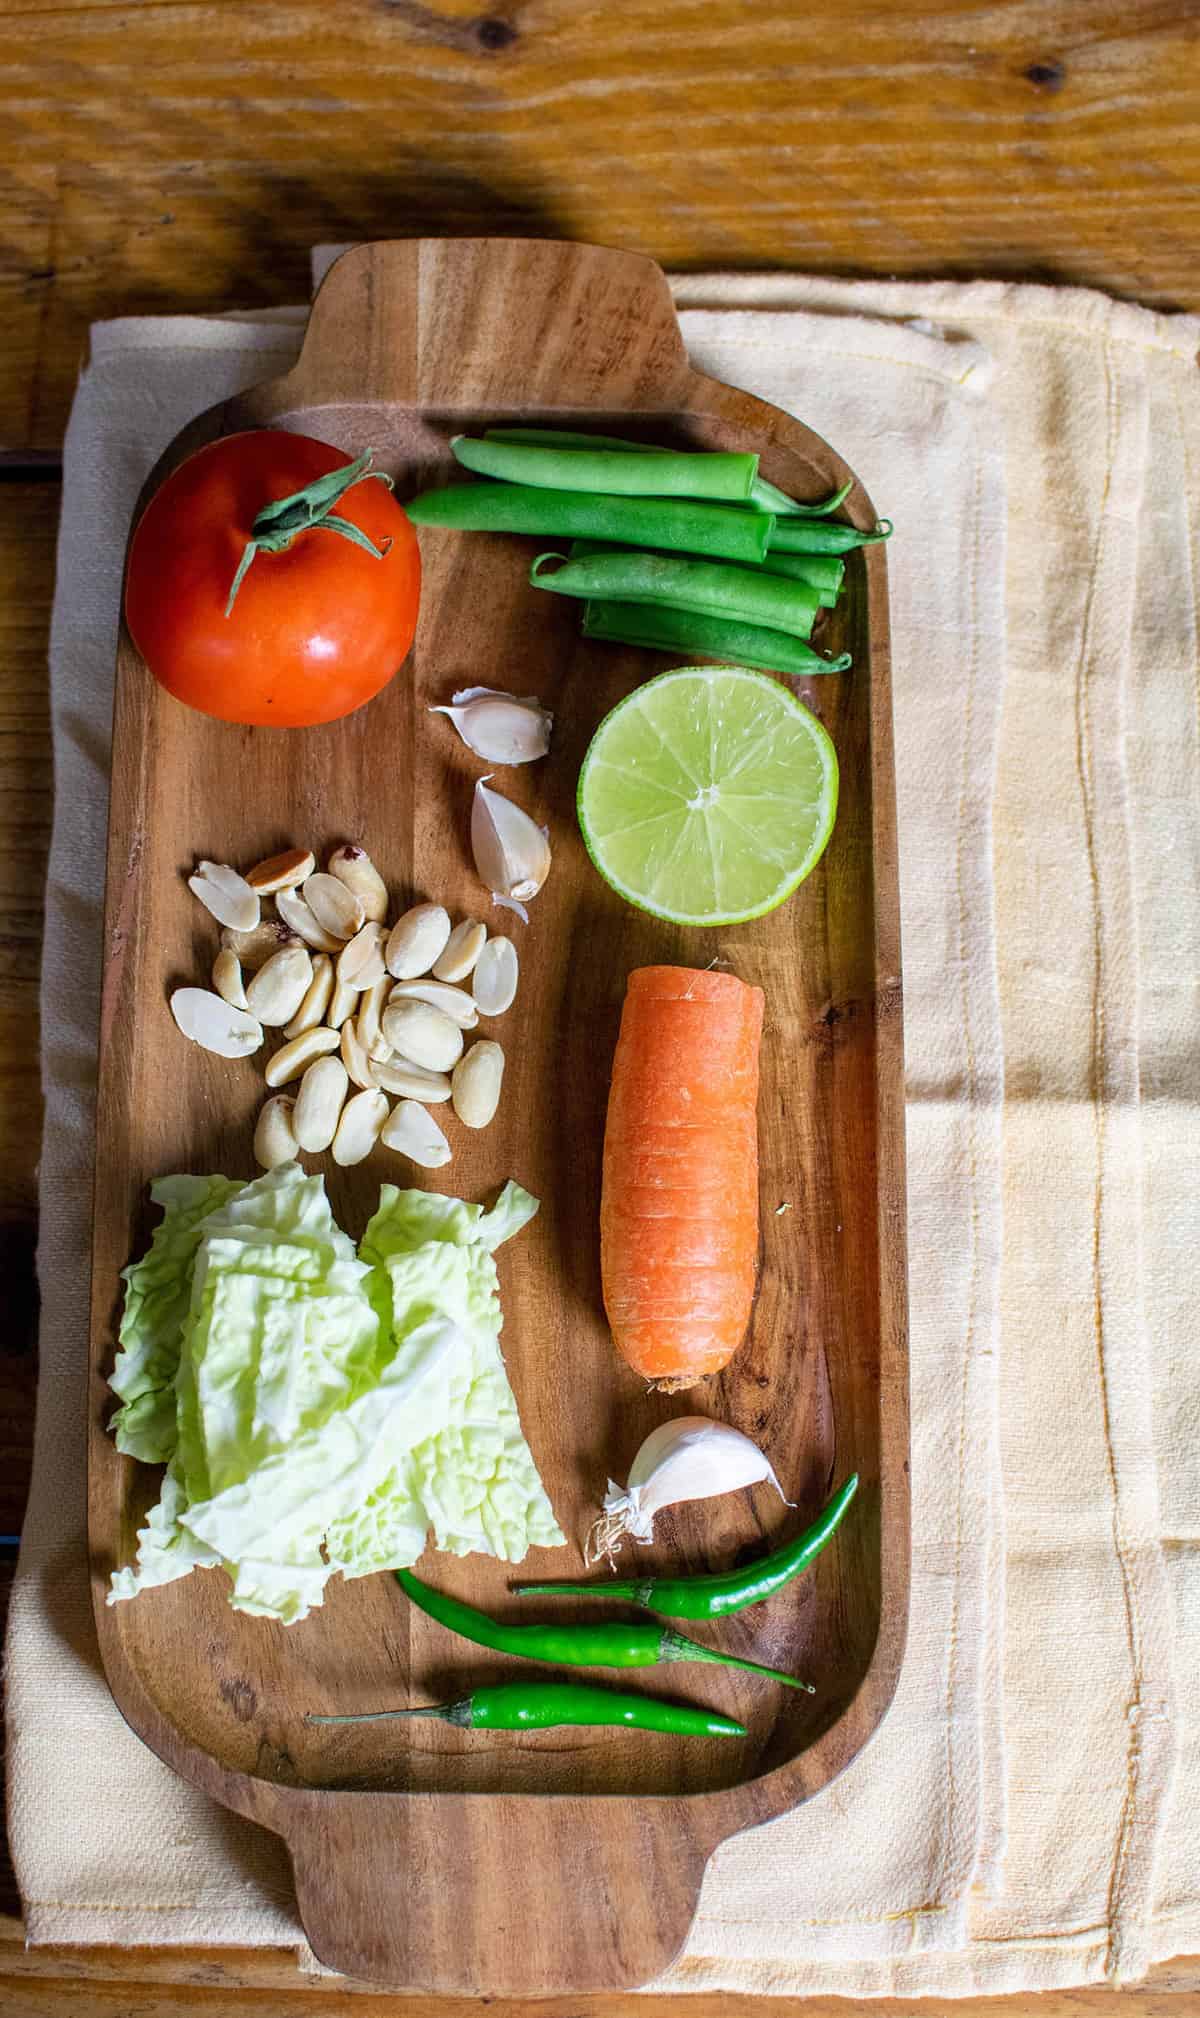 Vegan papaya salad ingredients laid out on a wooden board, showing tomato, beans, lime, garlic, peanuts, carrot, cabbage and green chilli